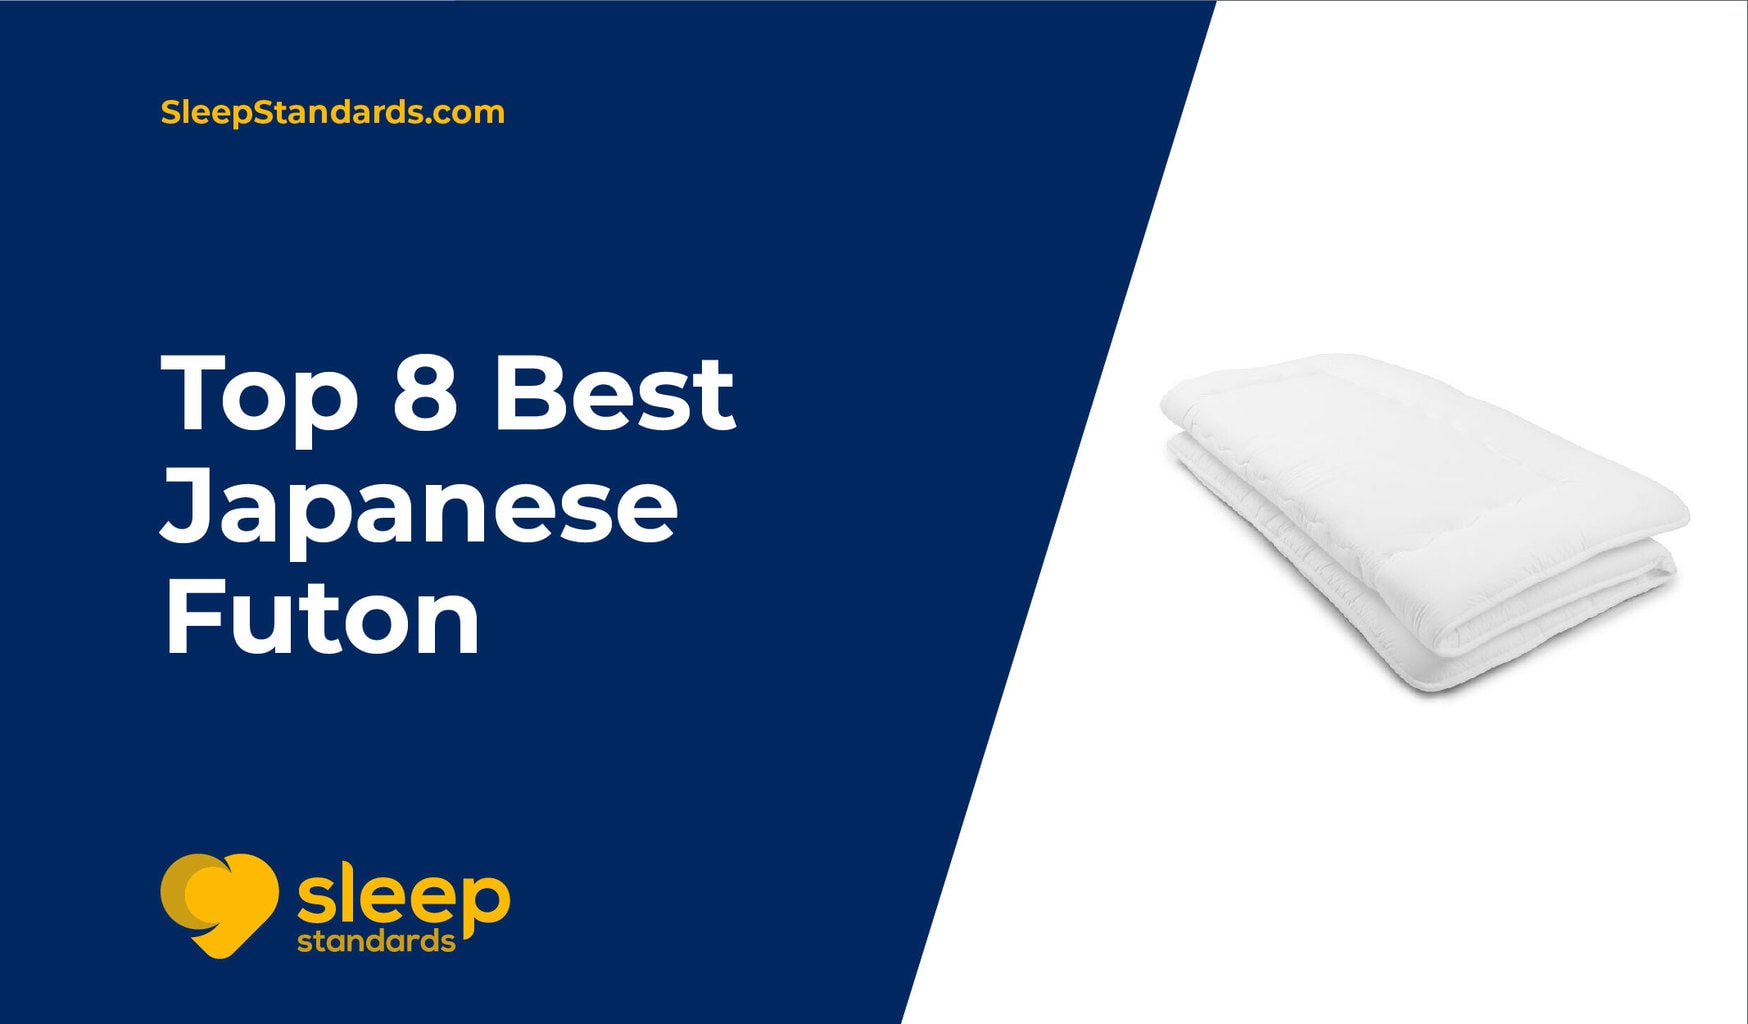 Top 8 Best Japanese Futon In 2020: Complete Buying Guide